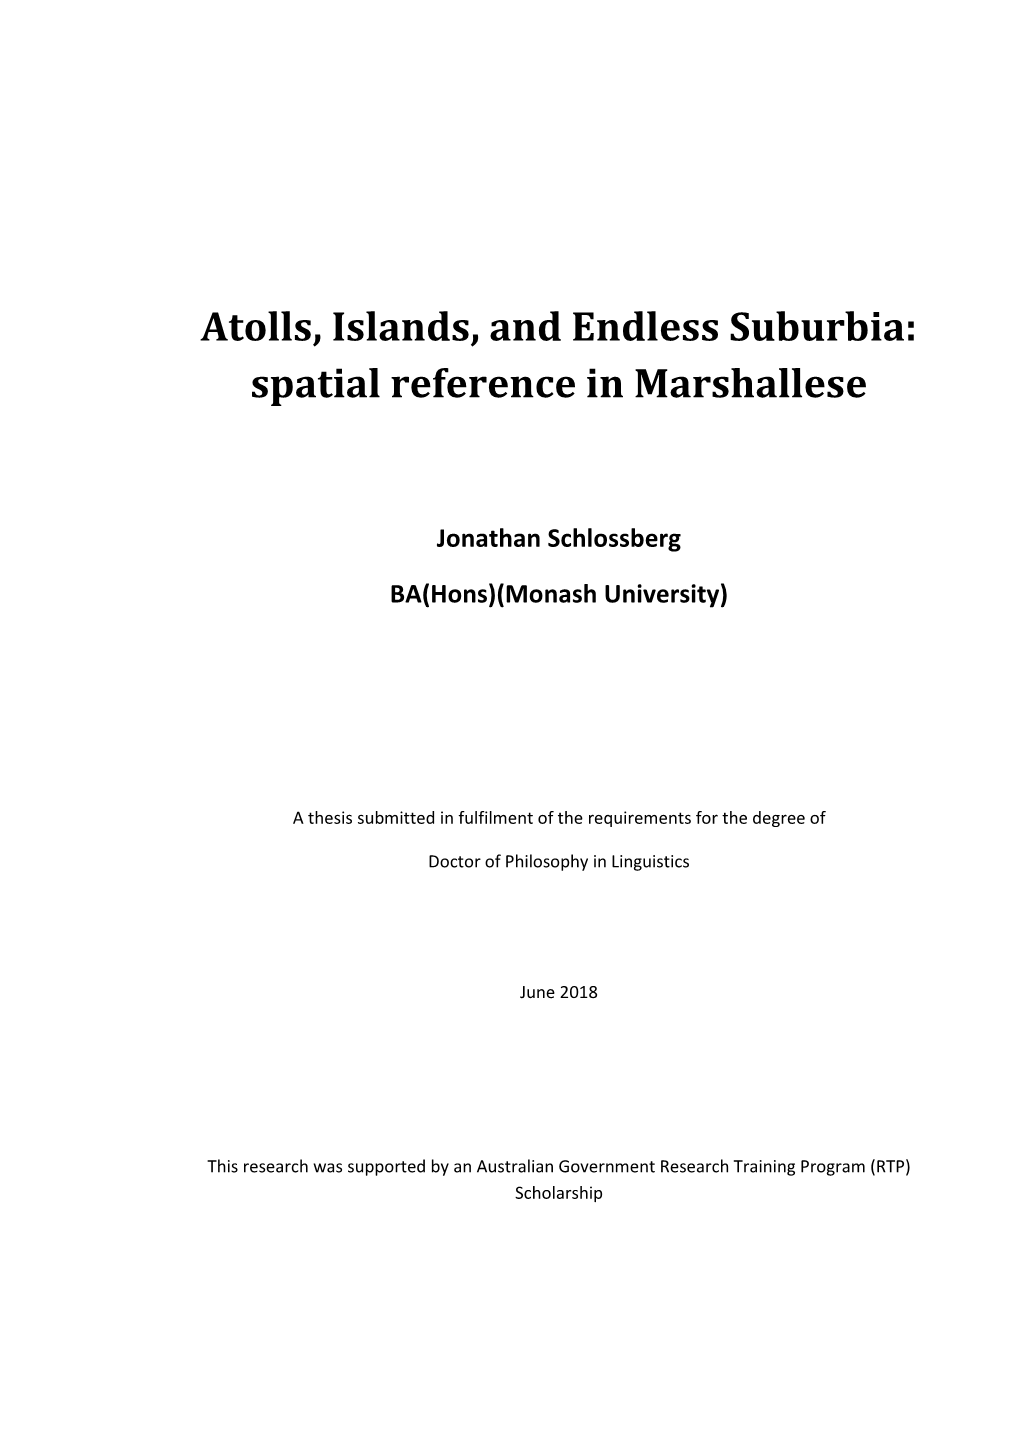 Spatial Reference in Marshallese